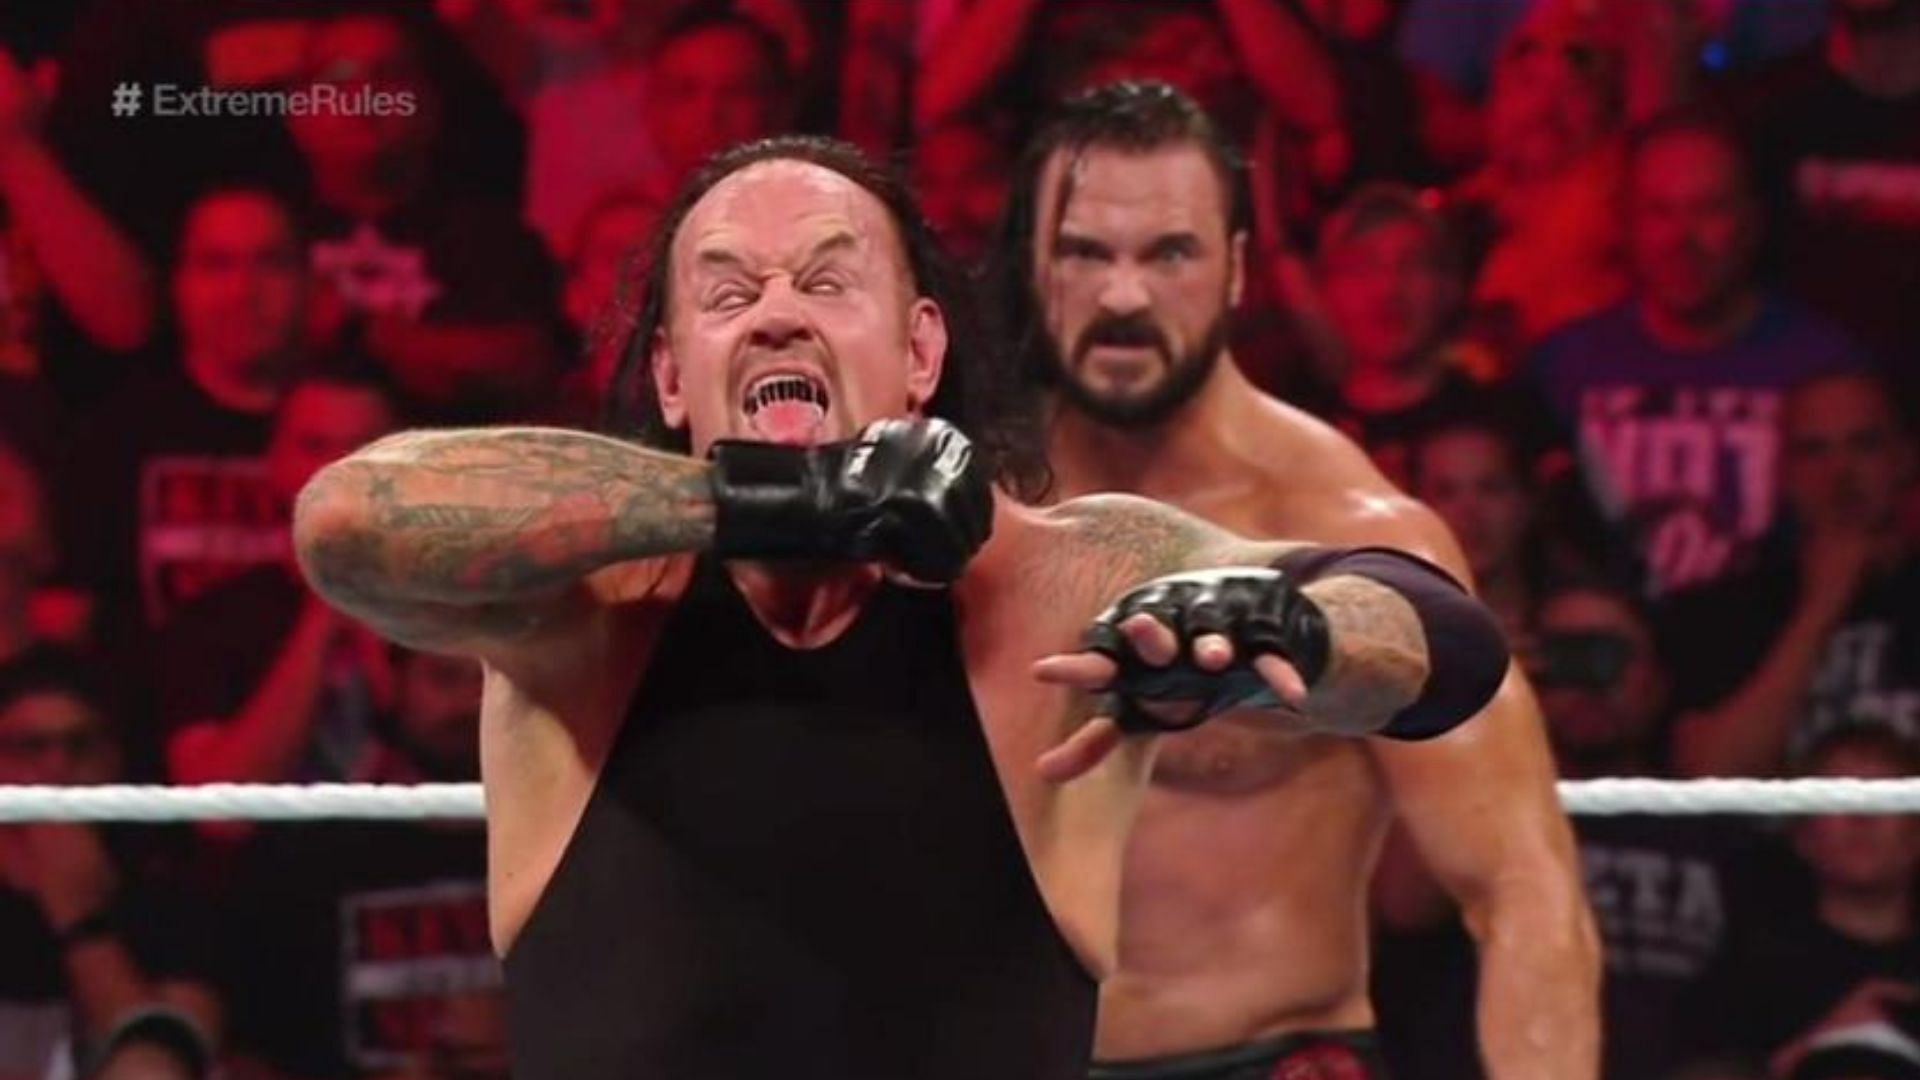 The Undertaker and Drew McIntyre met in a tag match at Extreme Rules 2019